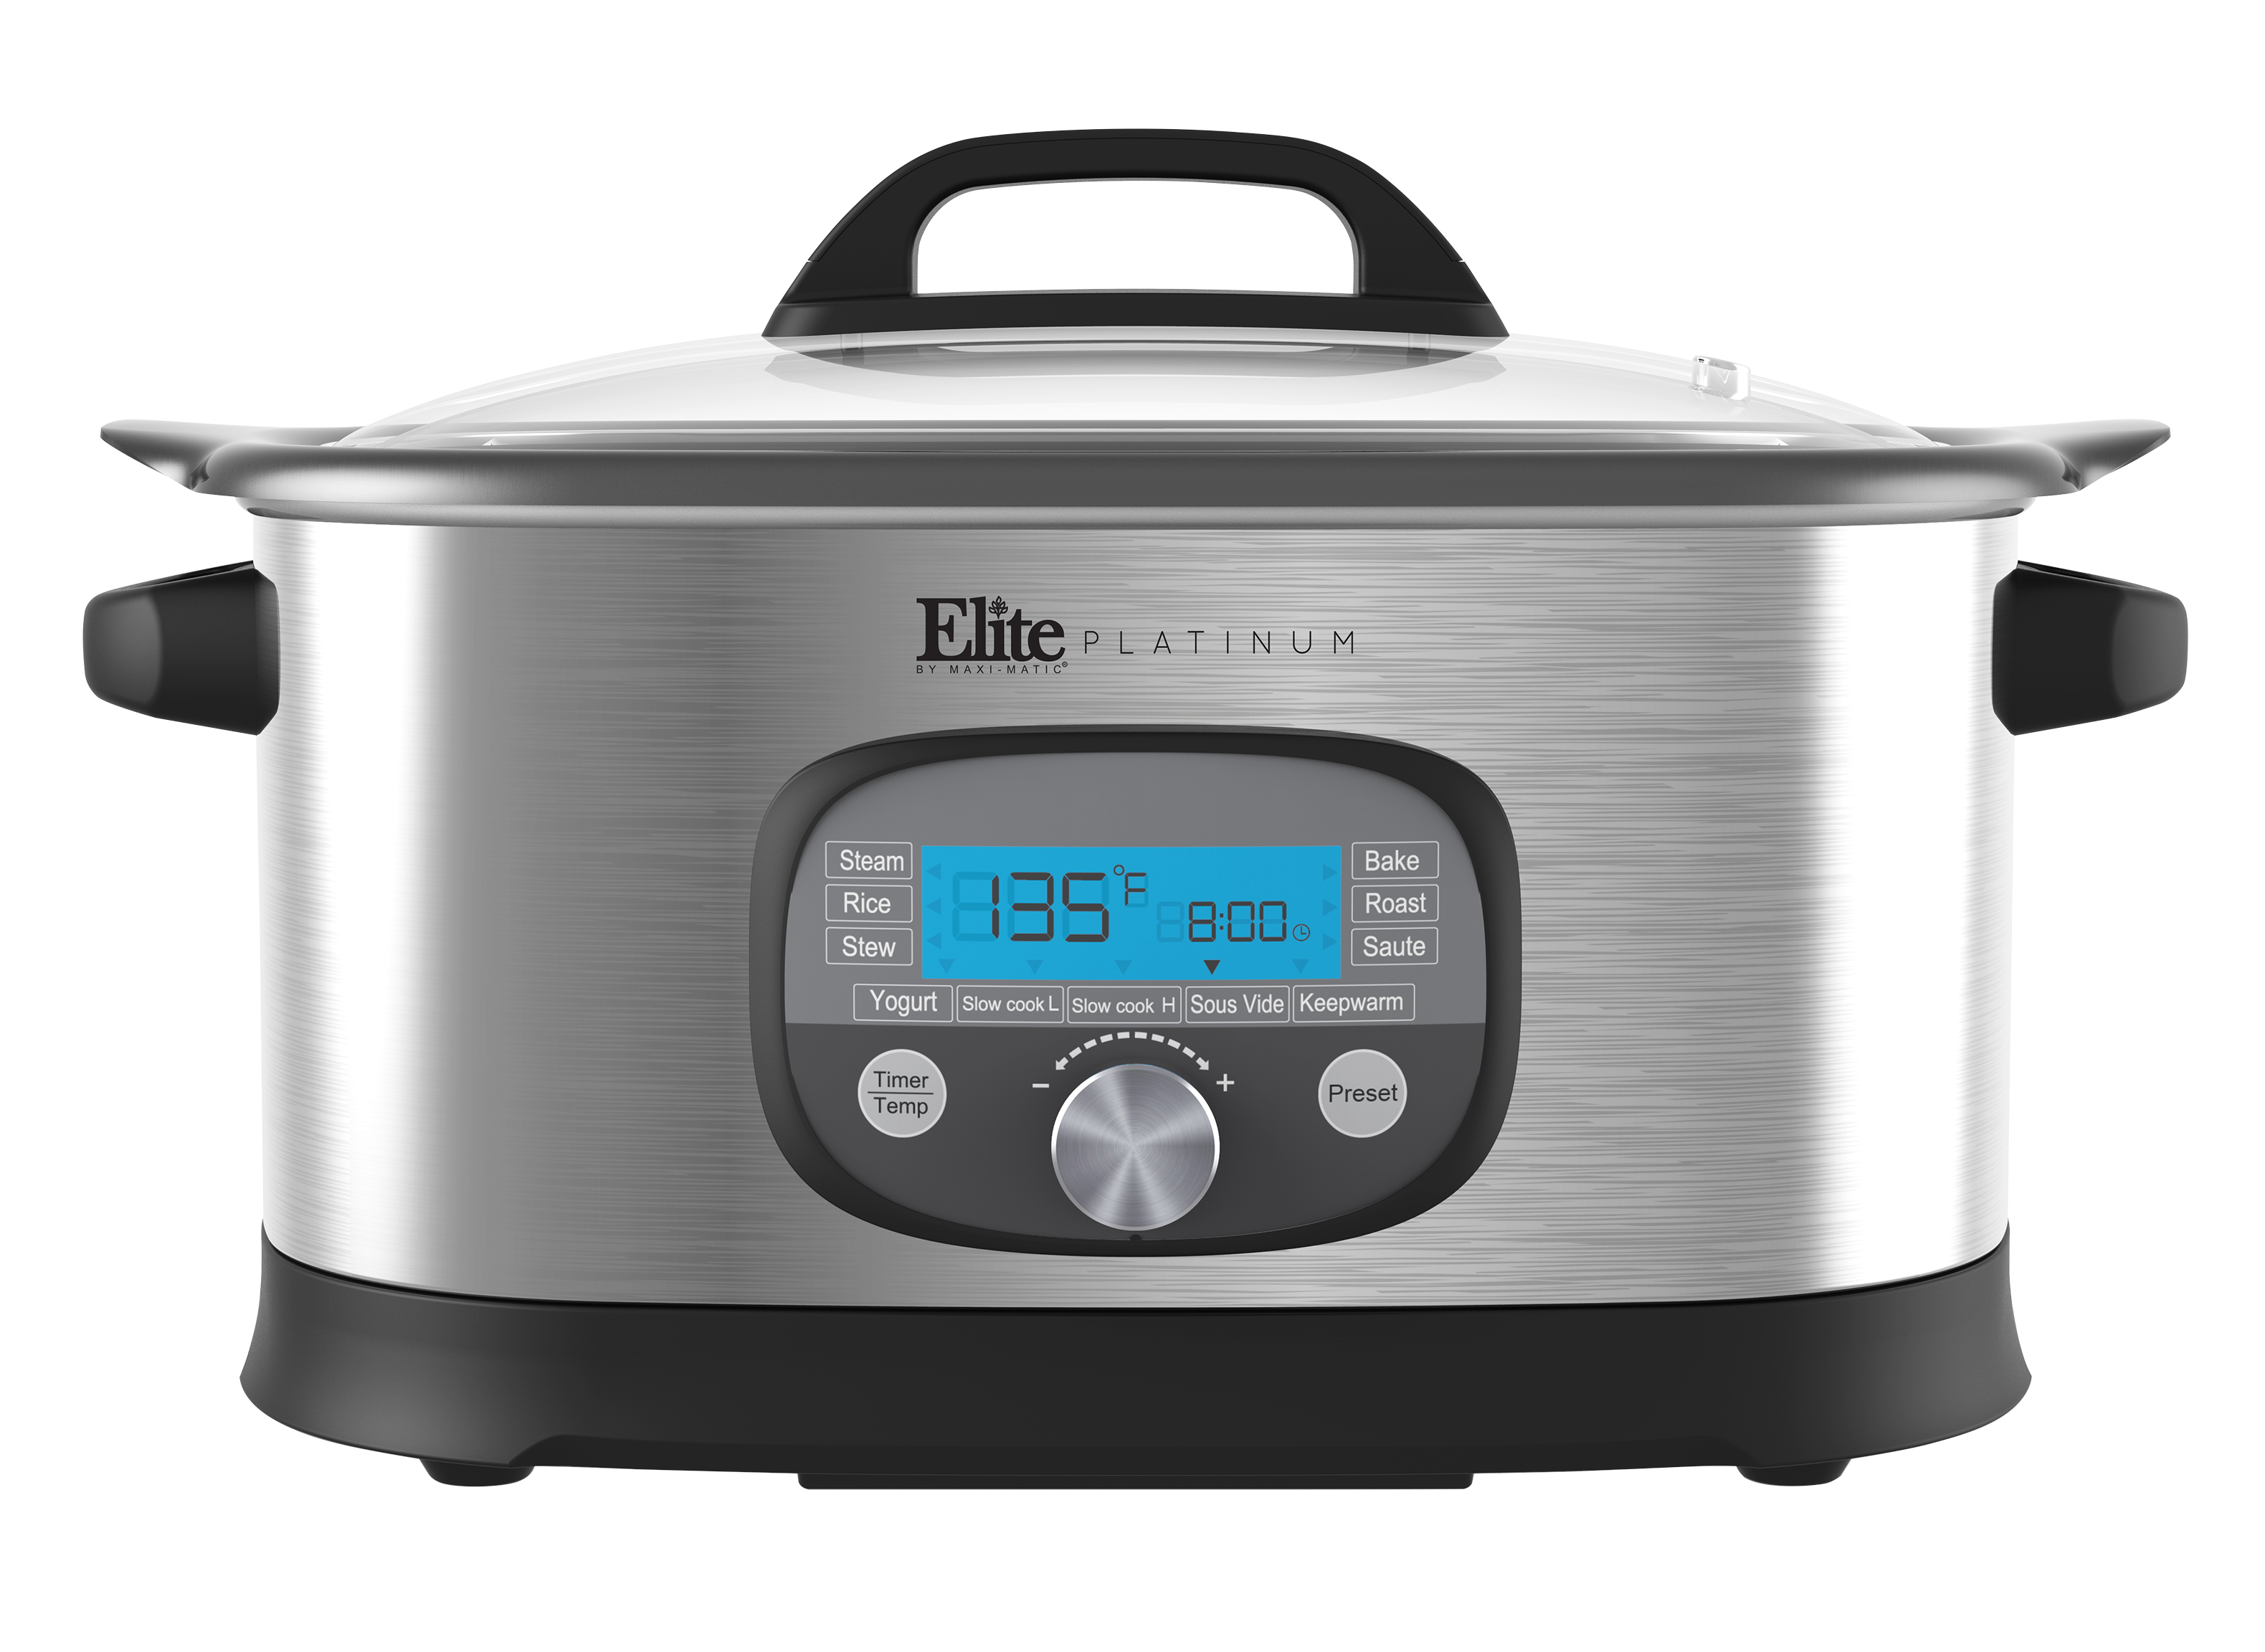 https://crdms.images.consumerreports.org/prod/products/cr/models/402069-without-pressure-cooking-mode-elite-platinum-mst-516-10015456.png